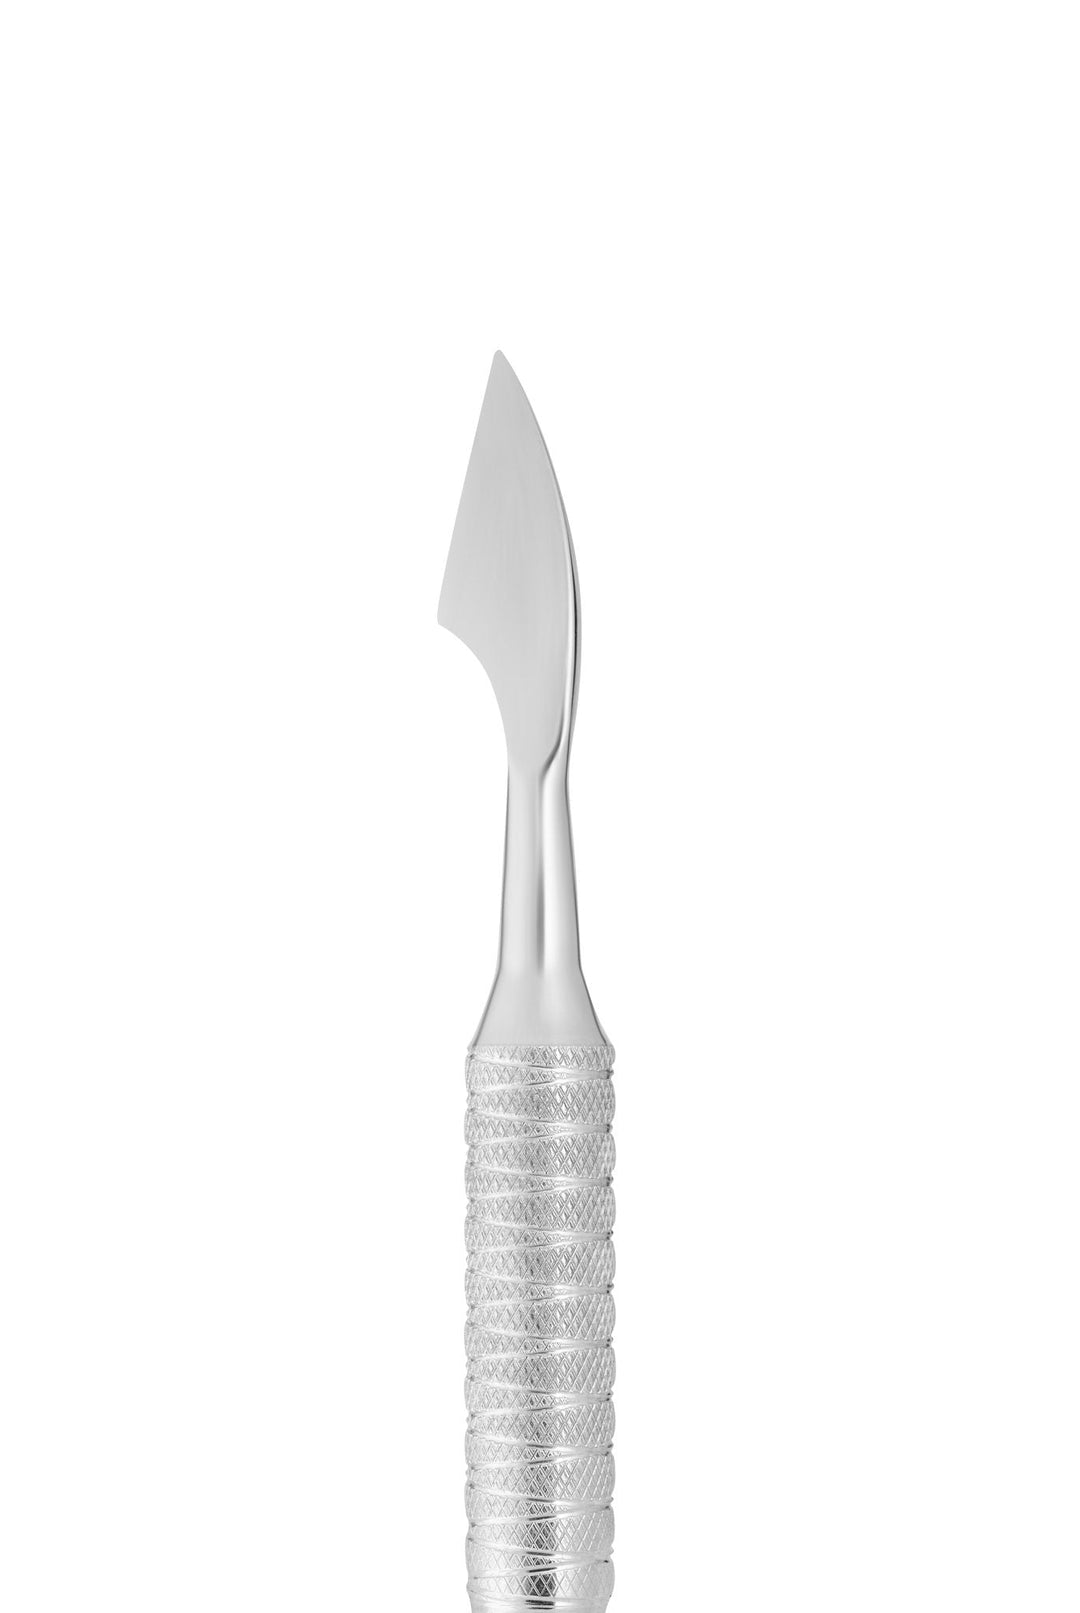 Staleks Cuticle Pusher and Nail Cleaner Expert 30 Type 3 | U-tools